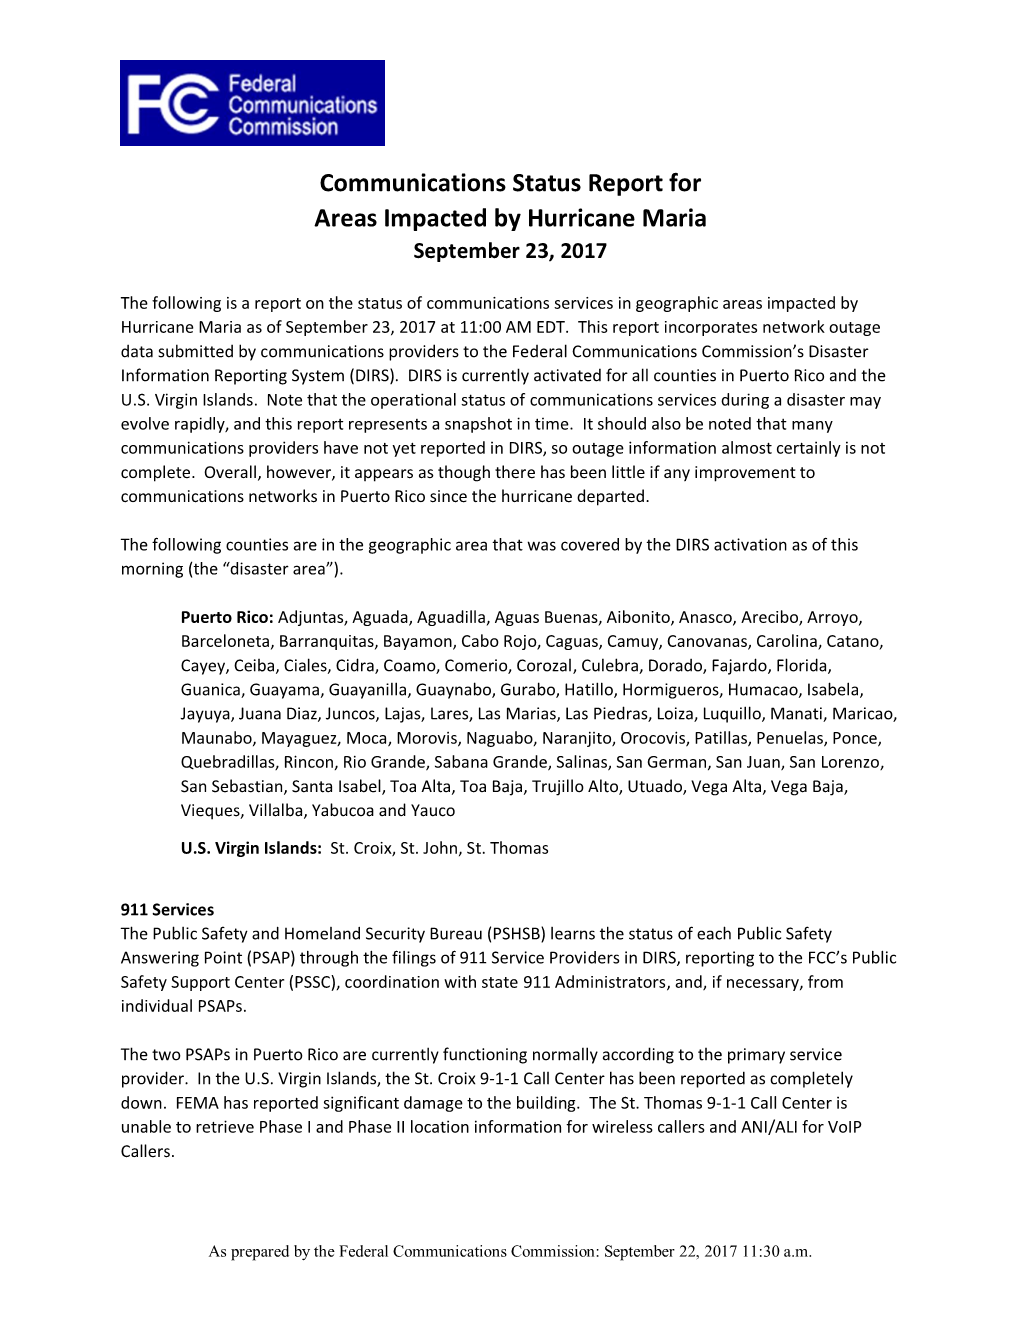 Communications Status Report for Areas Impacted by Hurricane Maria September 23, 2017